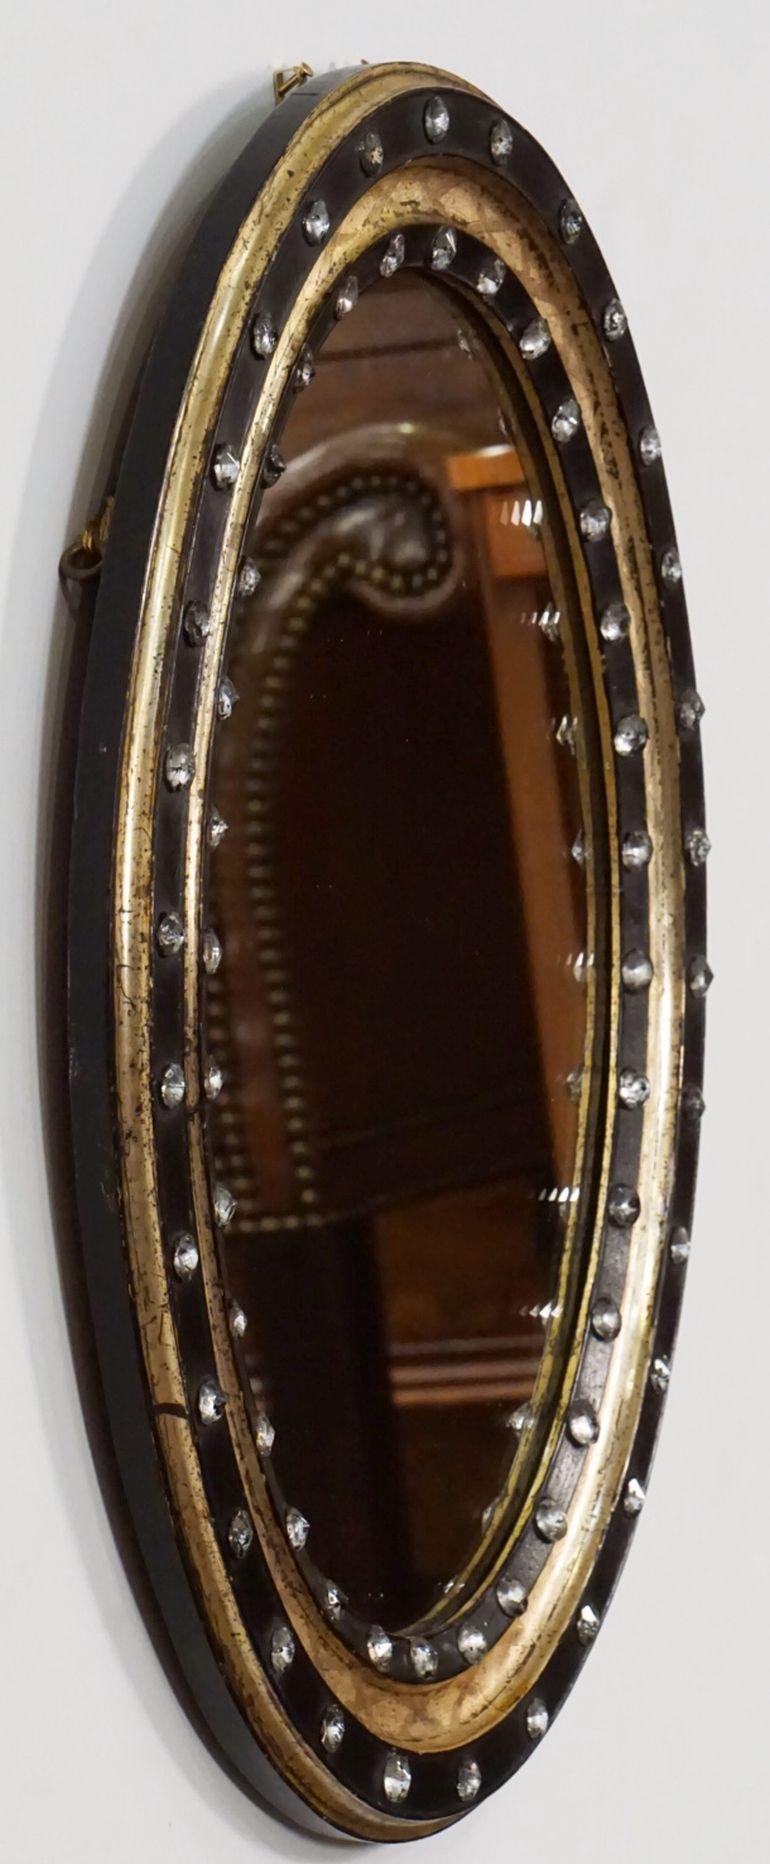 A fine Irish oval wall mirror from the 19th century, featuring a distinctive frame of alternating raised ebonized slips with original faceted glass stud decorations (Waterford border beads), separated by gilded and X-decorated recesses. 

Measures: